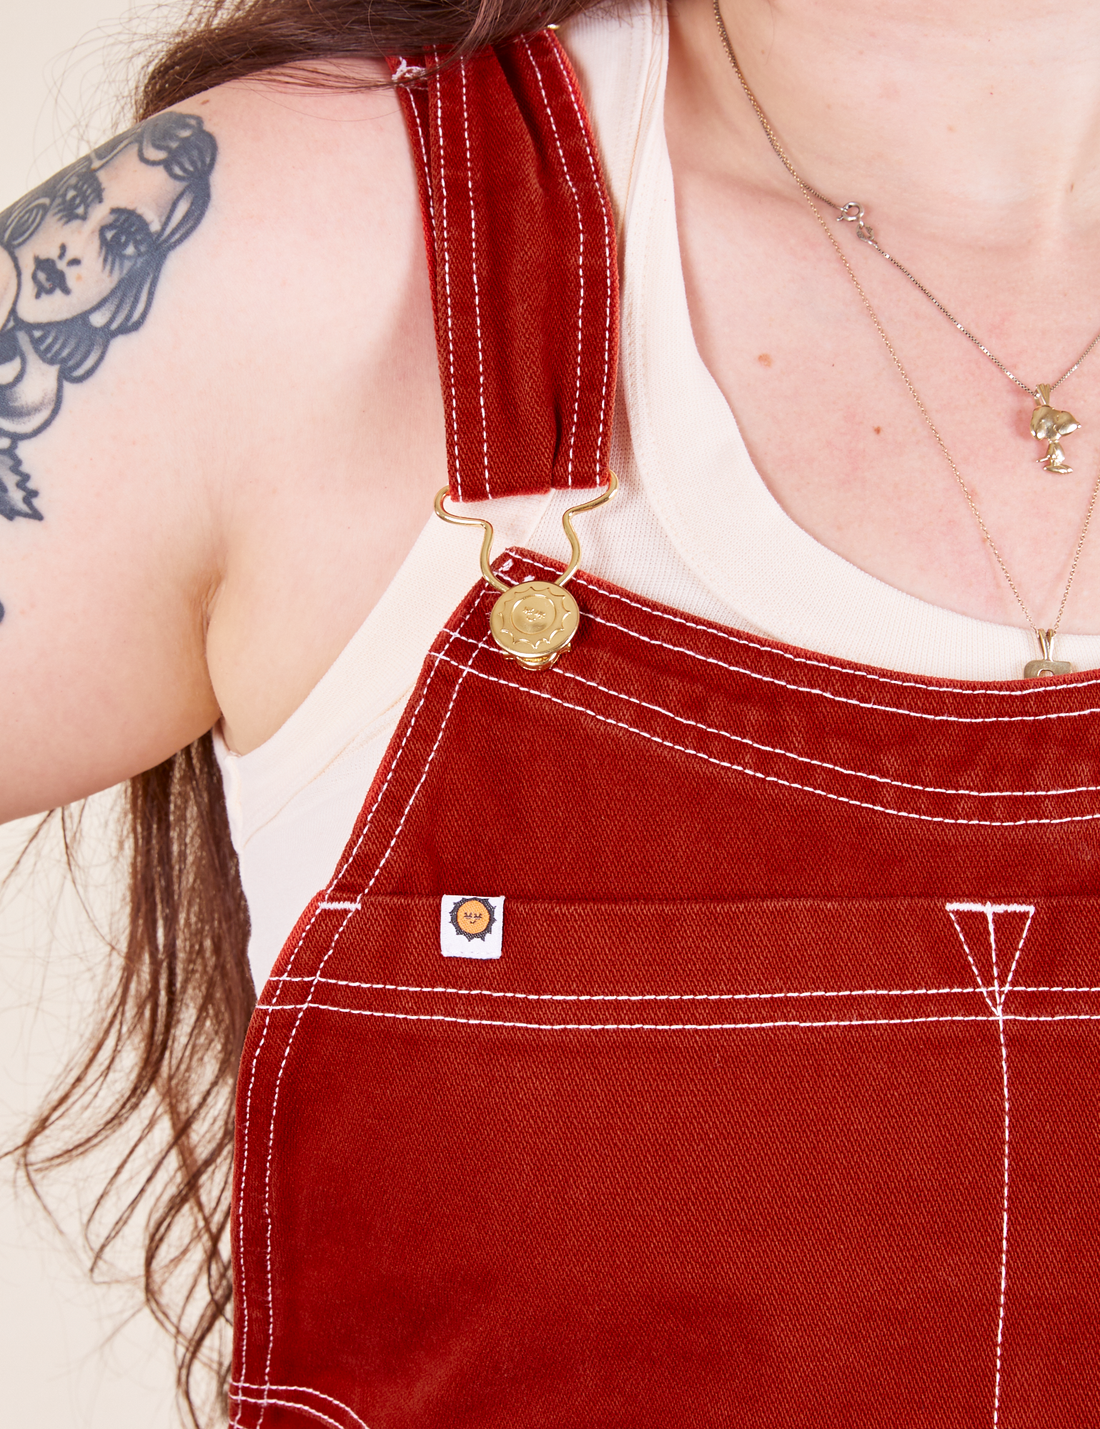 Original Overalls in Paprika front close up white stitching and gold hardware on Sydney